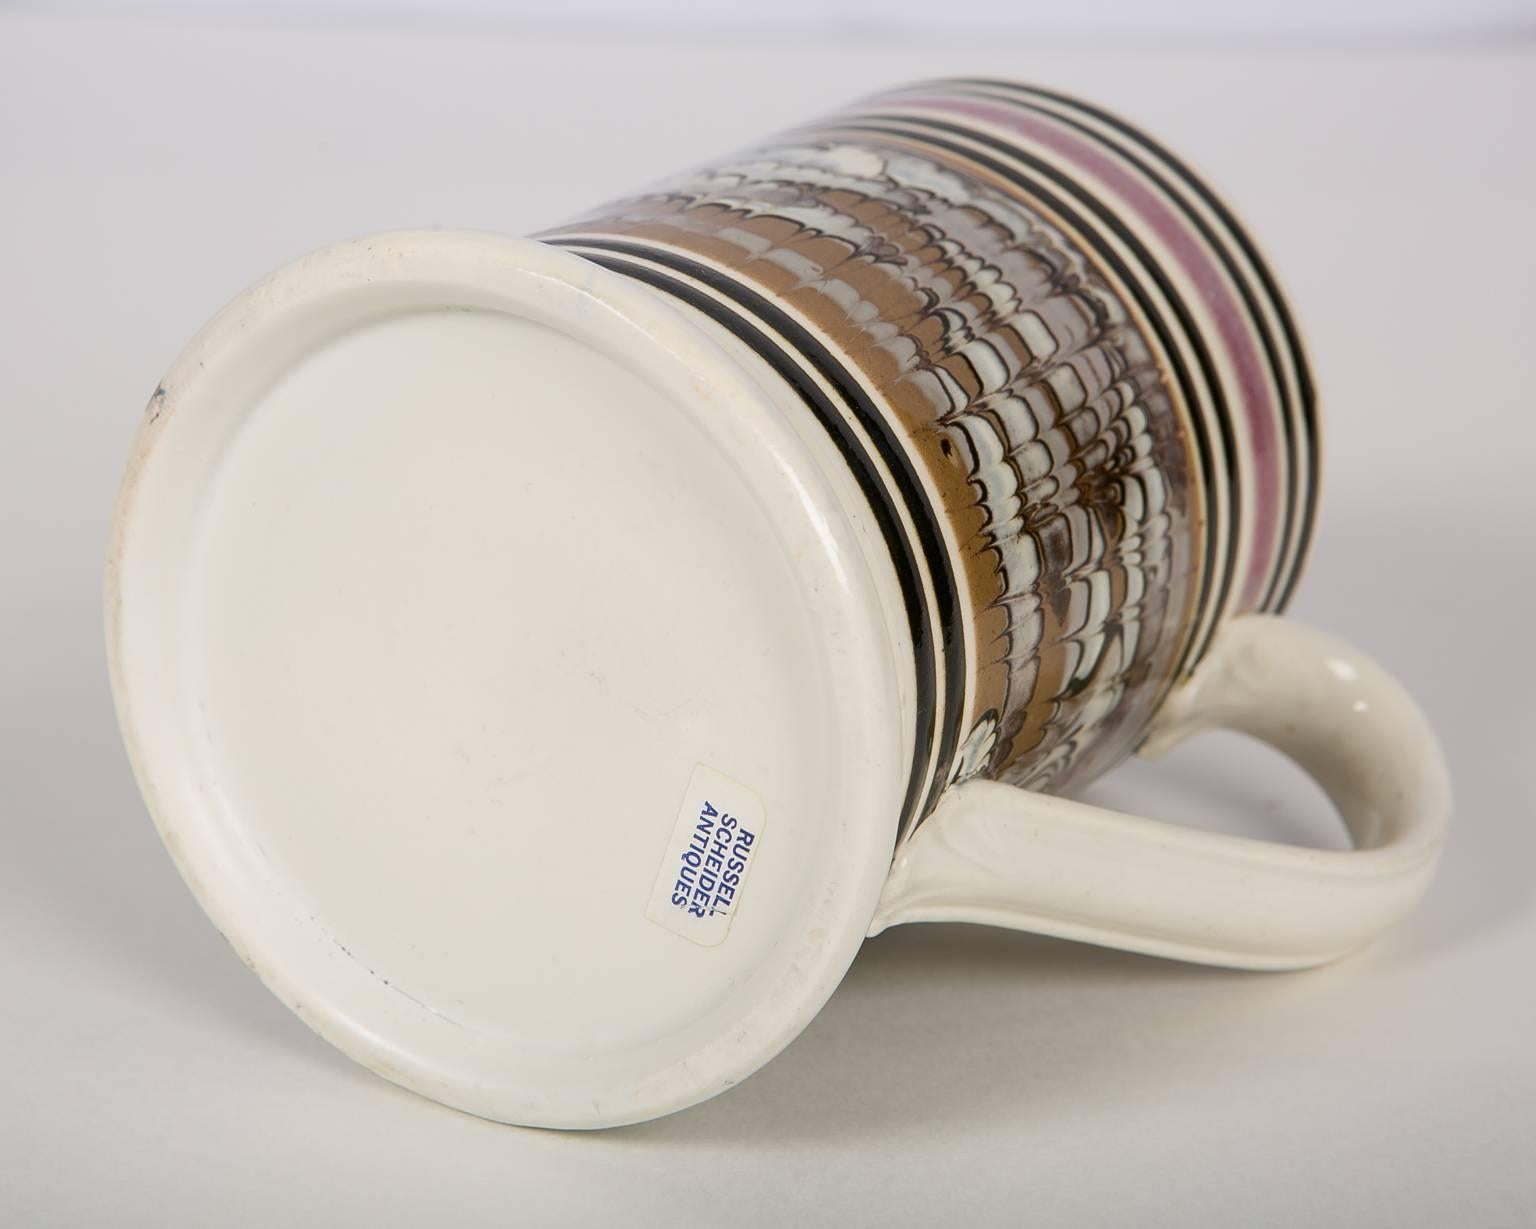 An exceptional and rare mochaware pint mug. The top of the mug is decorated with a band of lavender slip. Below the band is a rare design of combed slip in three colors: lavender, light blue, and midnight brown. The unique design is created by the